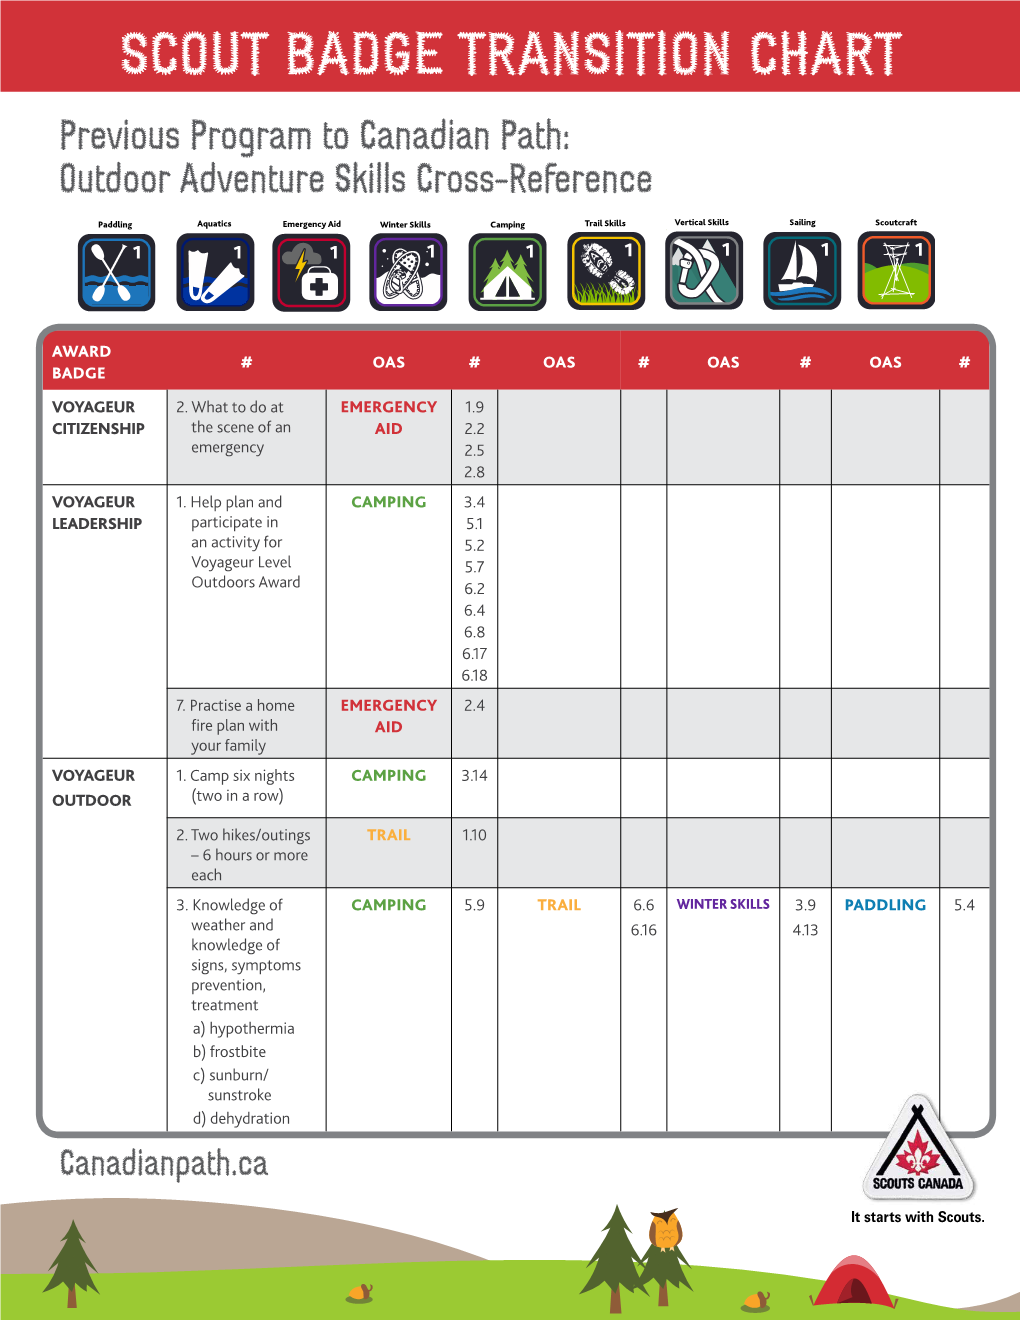 SCOUT BADGE TRANSITION CHART Previous Program to Canadian Path: Outdoor Adventure Skills Cross-Reference